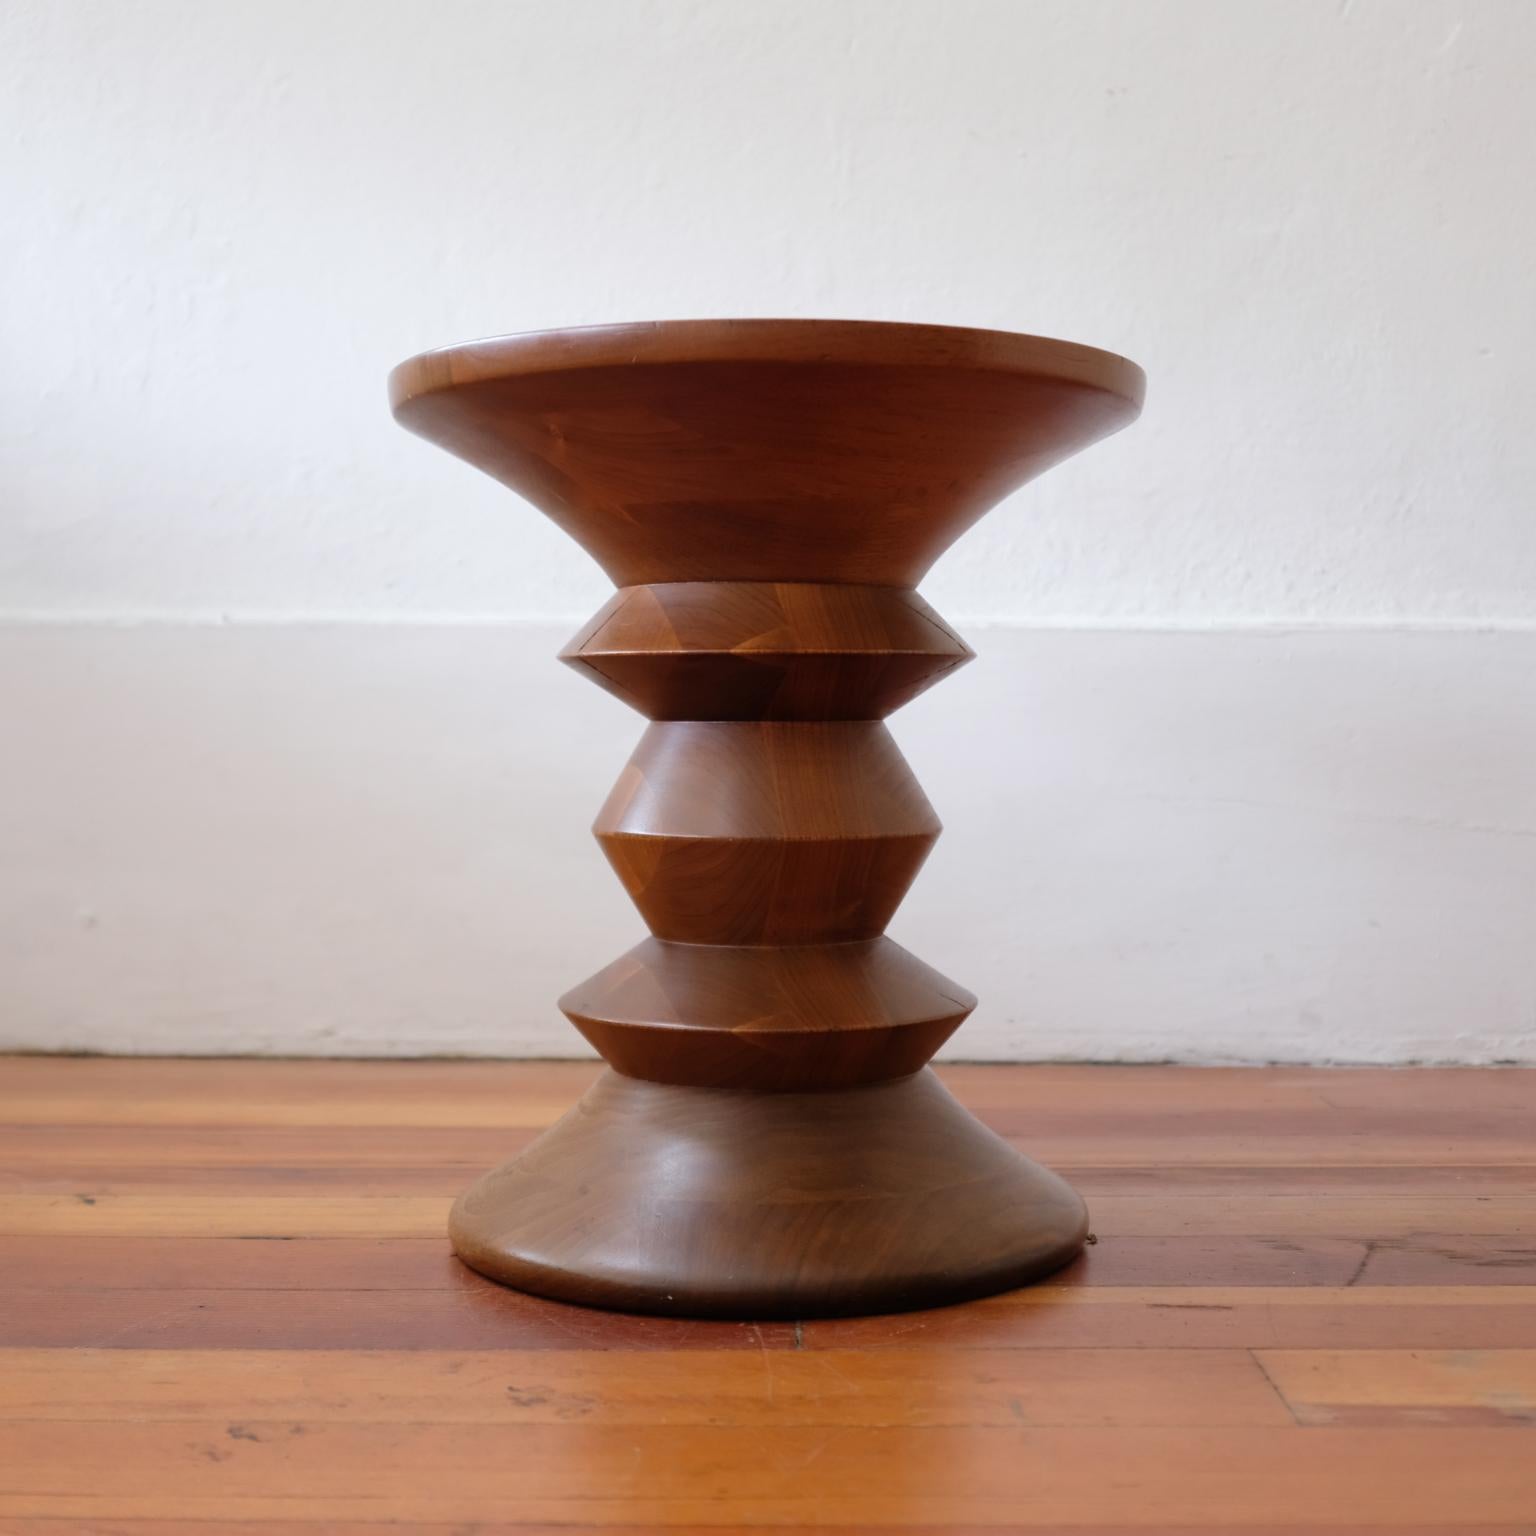 Time Life stool or table by Charles and Ray Eames. This is shape C in solid walnut. The design was originally created for the lobby and executive suites of the Time-Life Building at Rockefeller Center in New York City. Produced by Herman Miller,